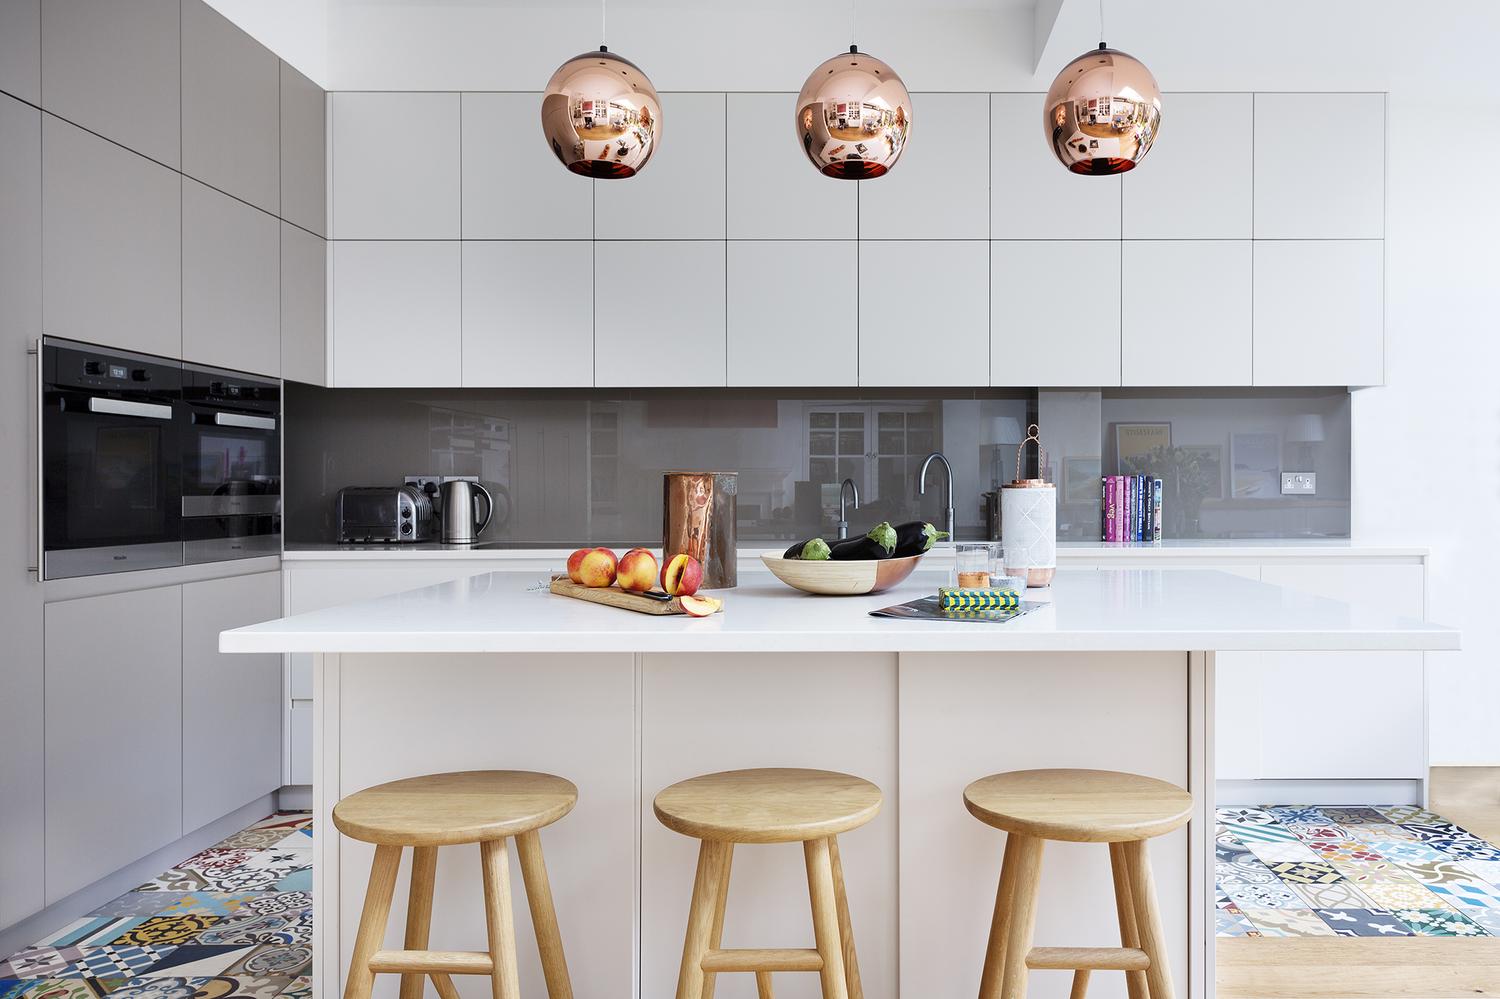 A Modern Kitchen Decor with Copper Lamps and Vintage Details